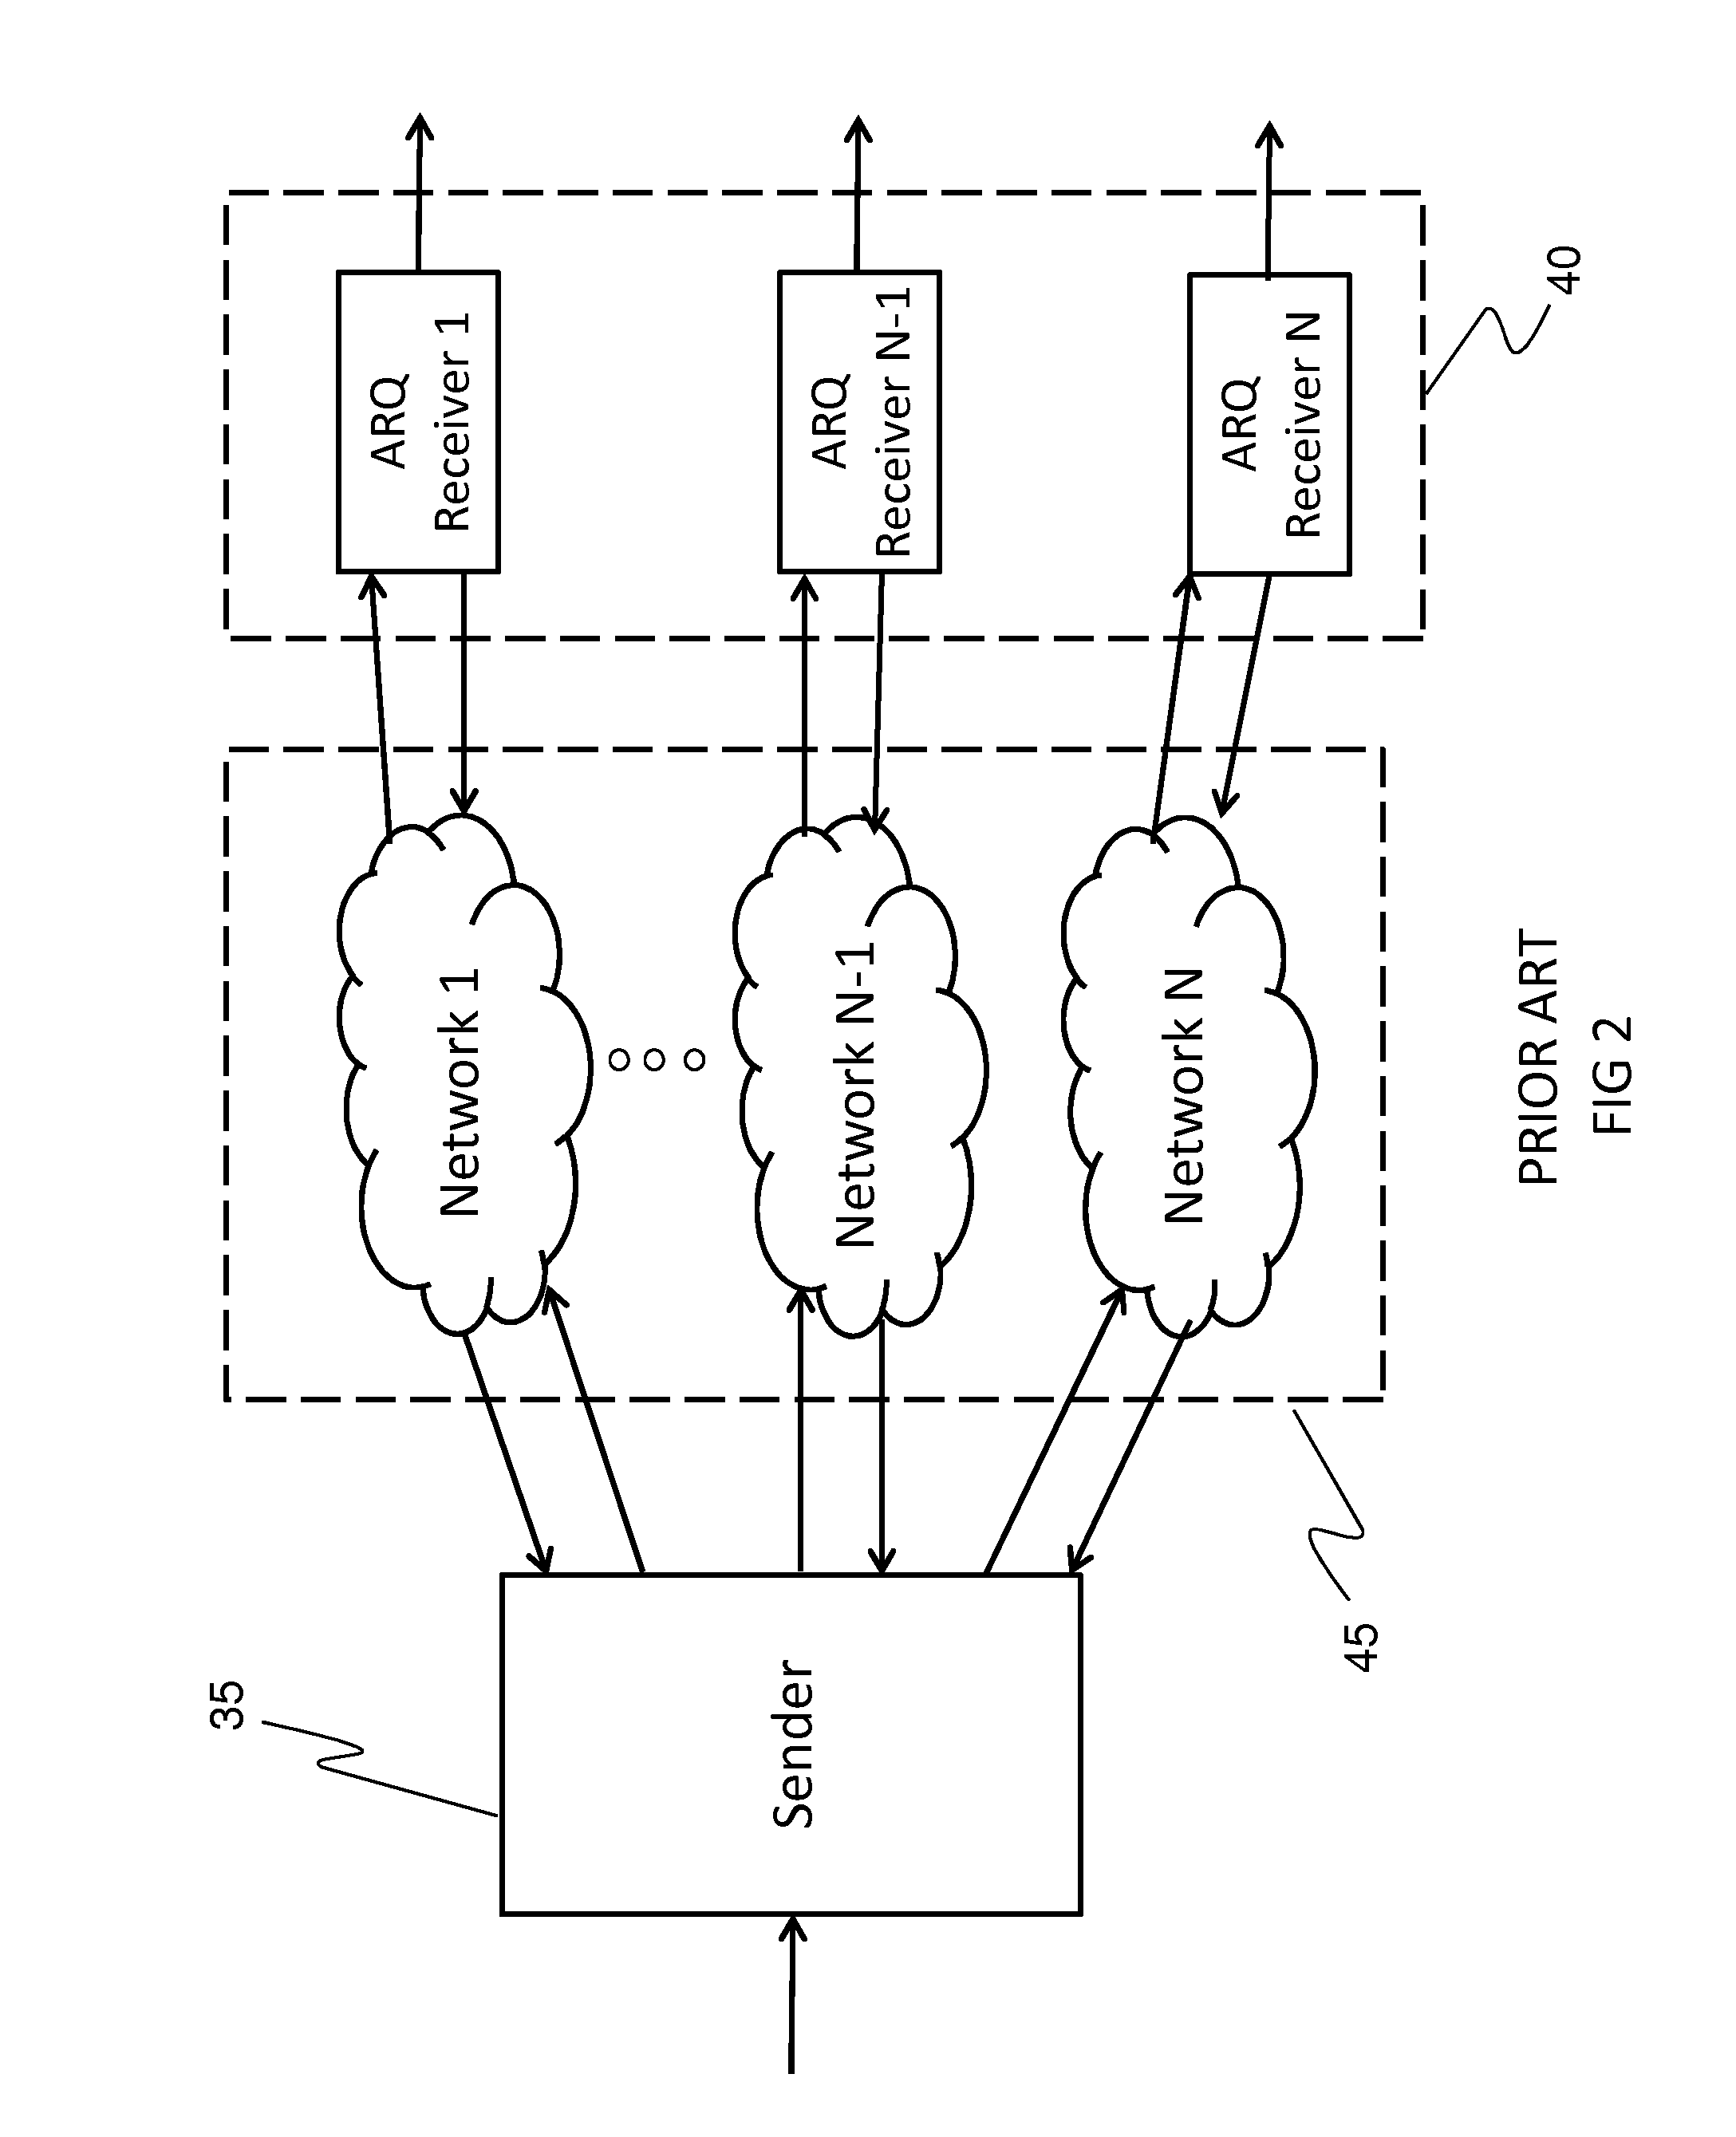 Adaptive profile switching system and method for media streaming over IP networks